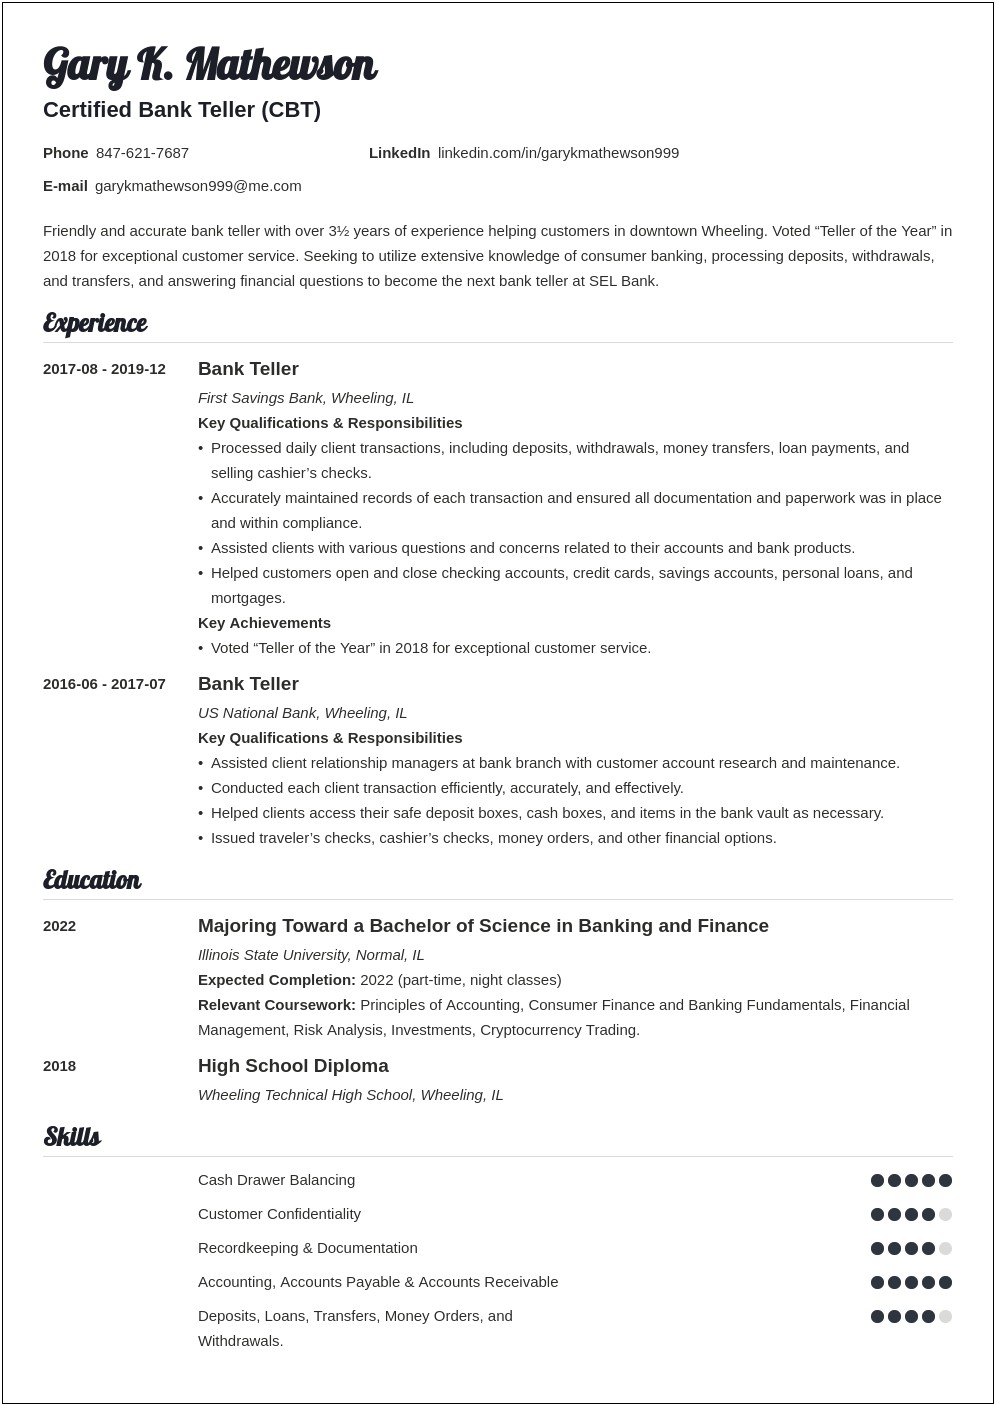 Free Resume For Banking Jobs